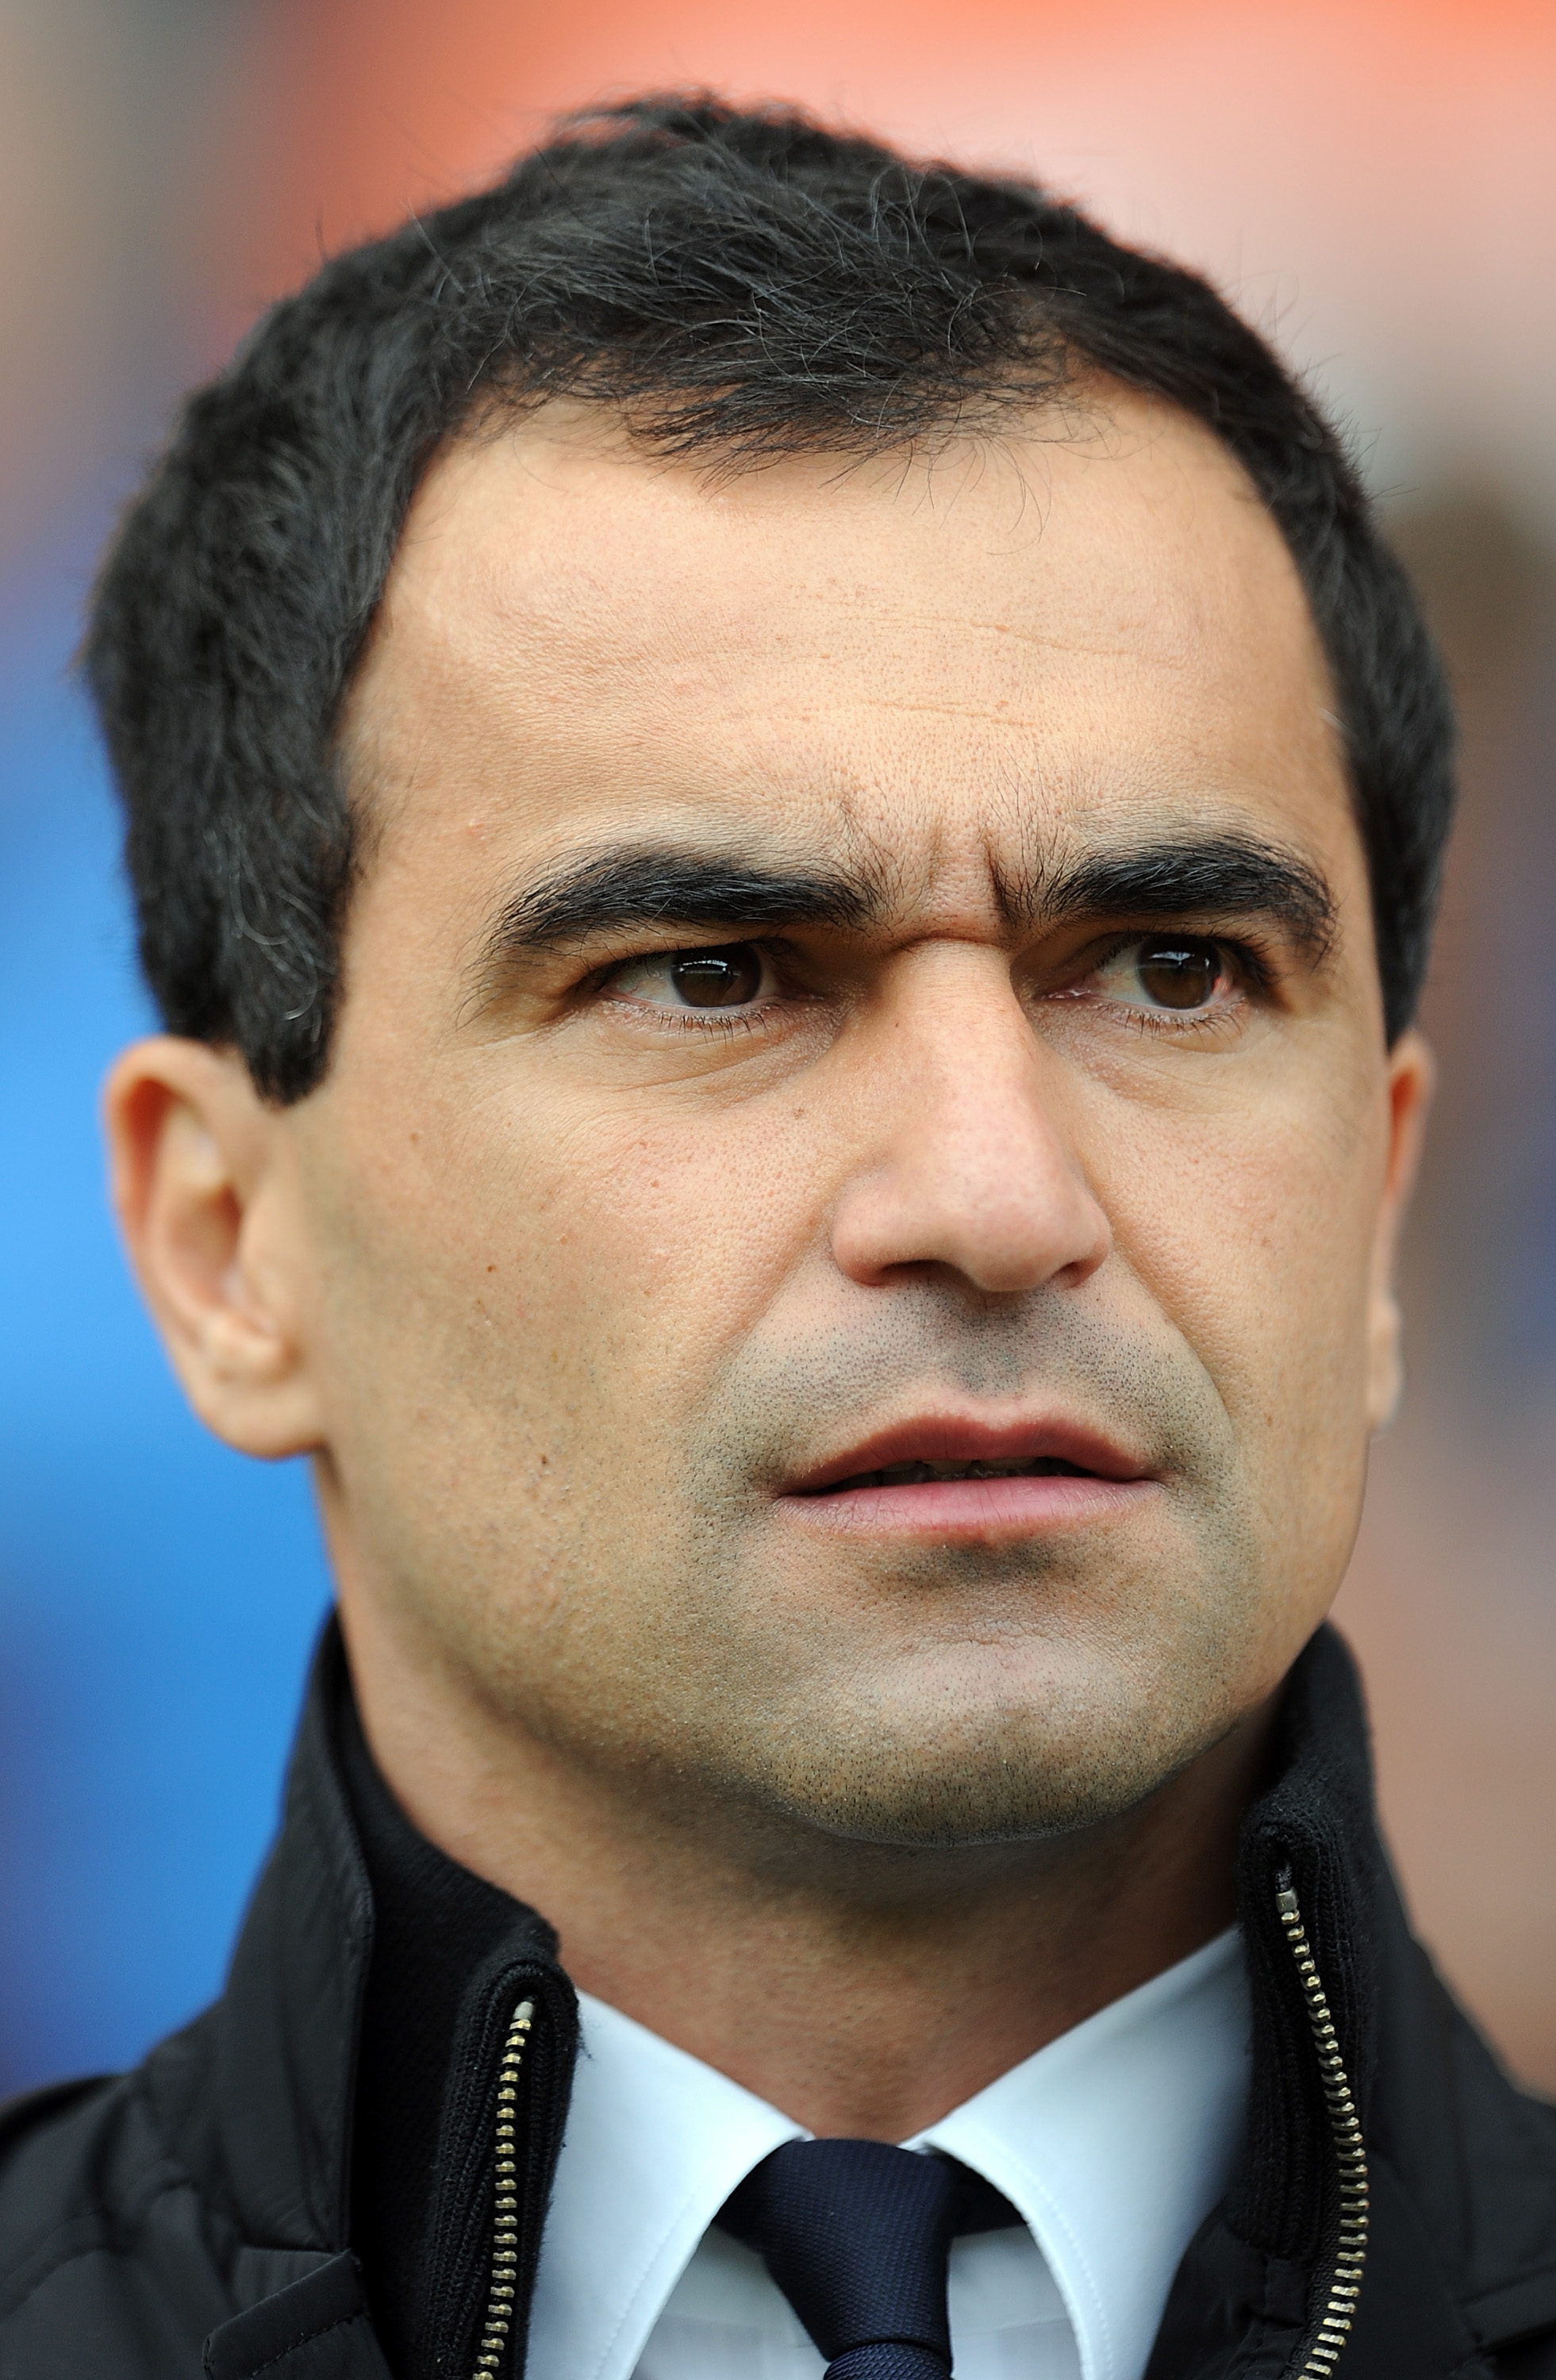 WIGAN, ENGLAND - OCTOBER 02: Wigan Athletic manager Roberto Martinez looks on during the Barclays Premier league match between Wigan Athletic and Wolverhampton Wanderers at DW Stadium on October 2, 2010 in Wigan, England.  (Photo by Chris Brunskill/Getty 